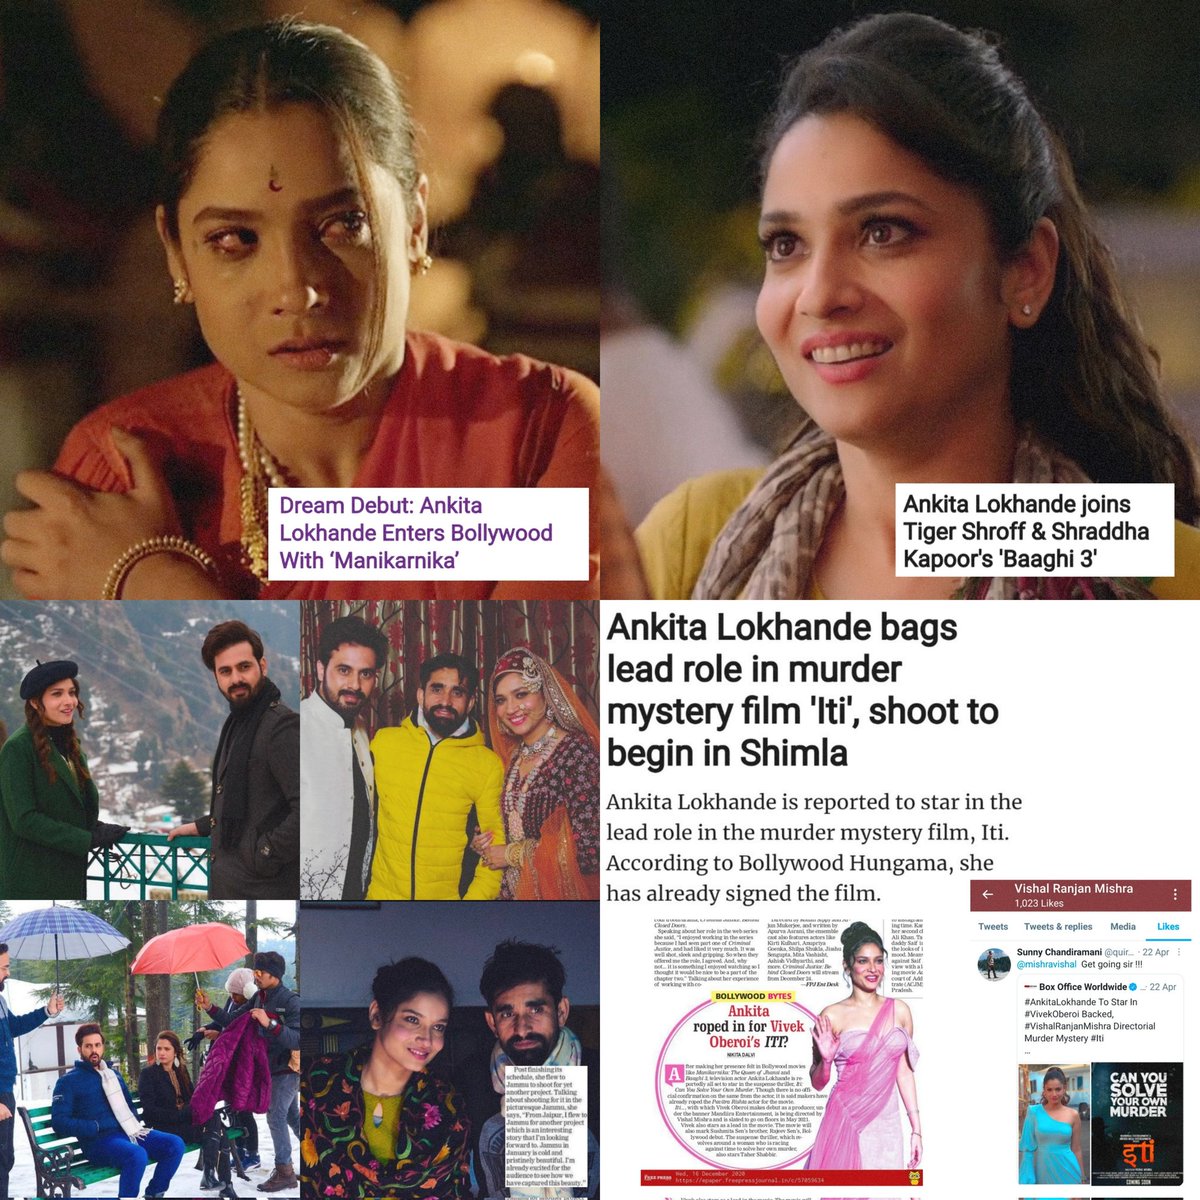 #3YearsOfAnkitaLokhandeInBollywood : from QUEEN OF TV to ONE OF THE TV STARS WHO MADE IT BIG IN BOLLYWOOD.

[ upcoming bollywood movies]

• the last coffee

• Vishal Rajan Mishra 's #ItiCanYouSolveYourOwnMurder 

#3YearsOfManikarnika 

(@anky1912)